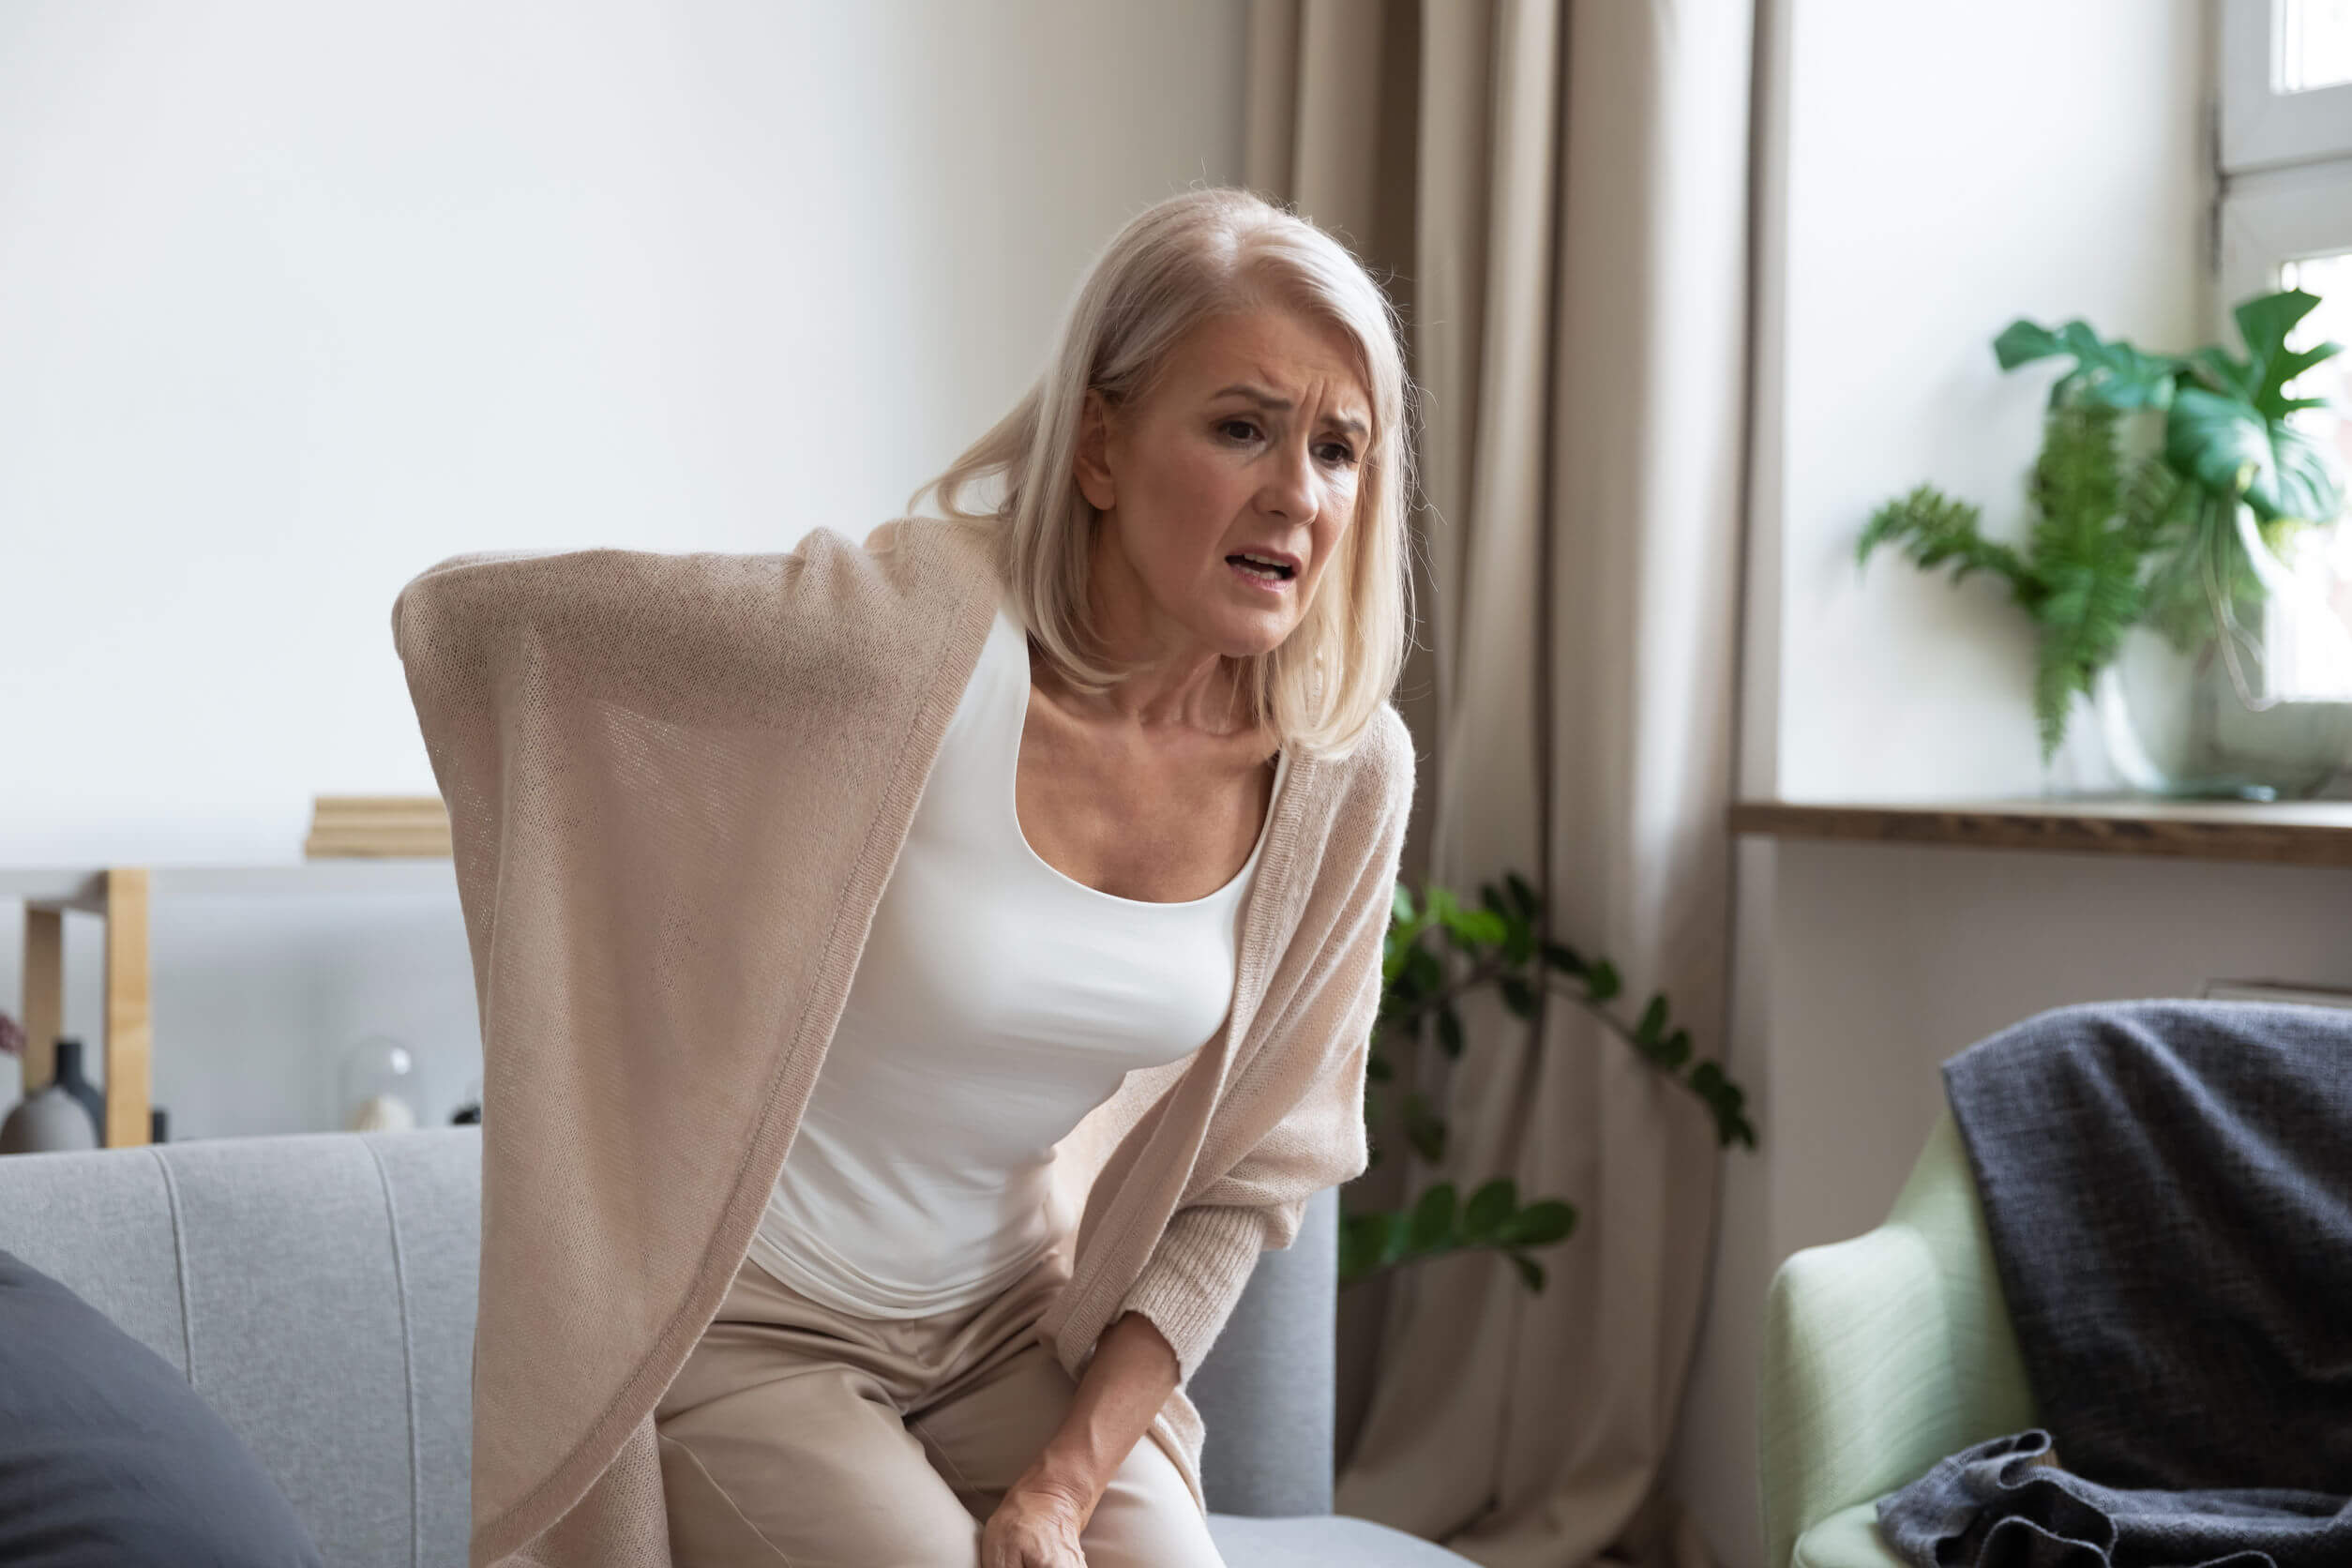 The causes and risk factors of menopause are specific